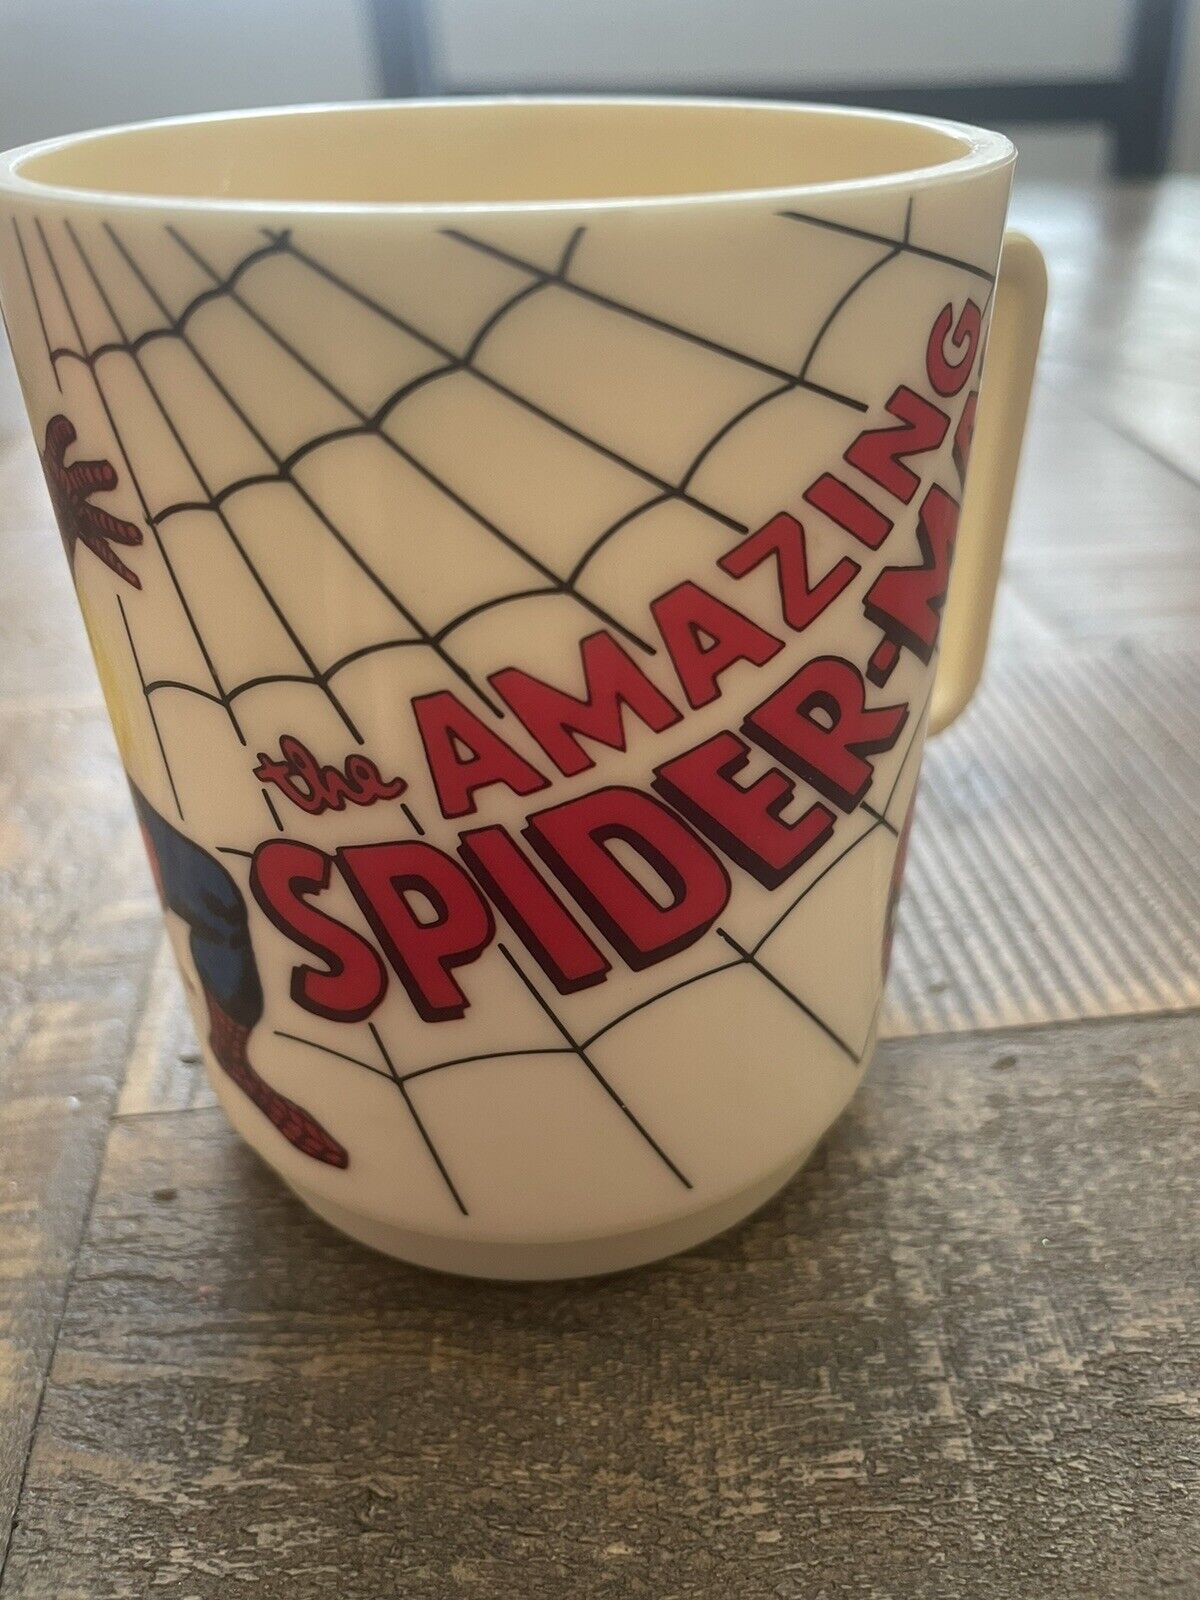 1977 The Amazing Spider-Man Cup